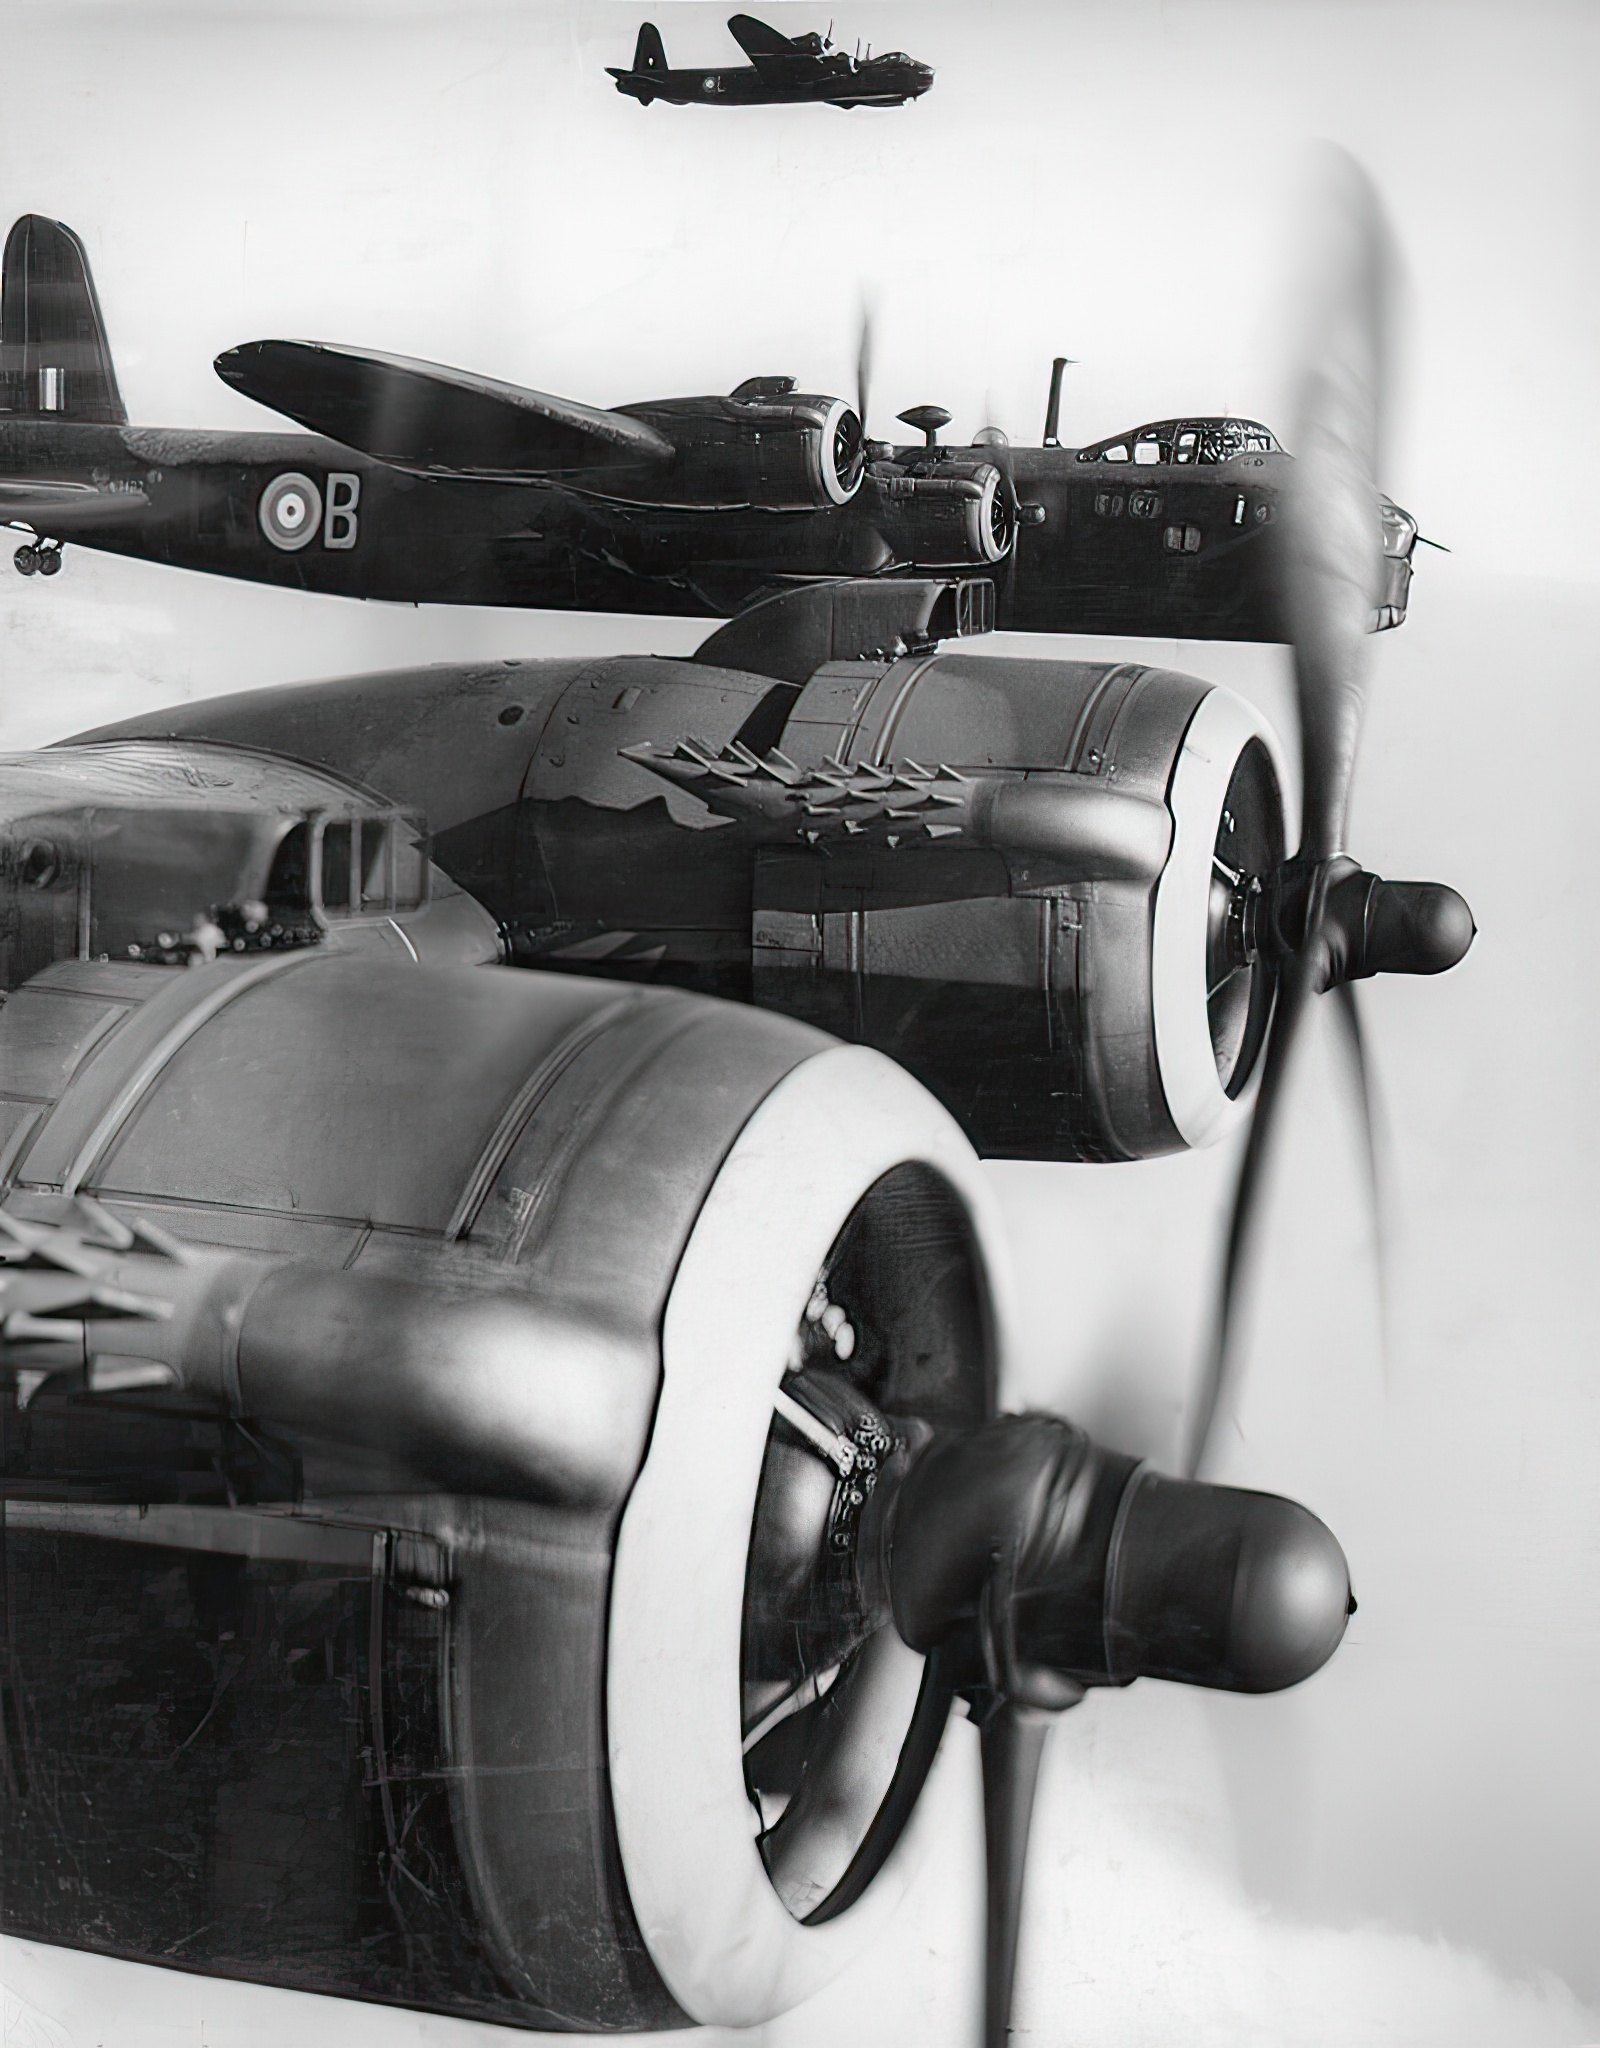 Short Stirlings of No. 1651 HCU (Heavy Conversion Unit) in flight, 1942. W7427 'B' is in the middle of the formation